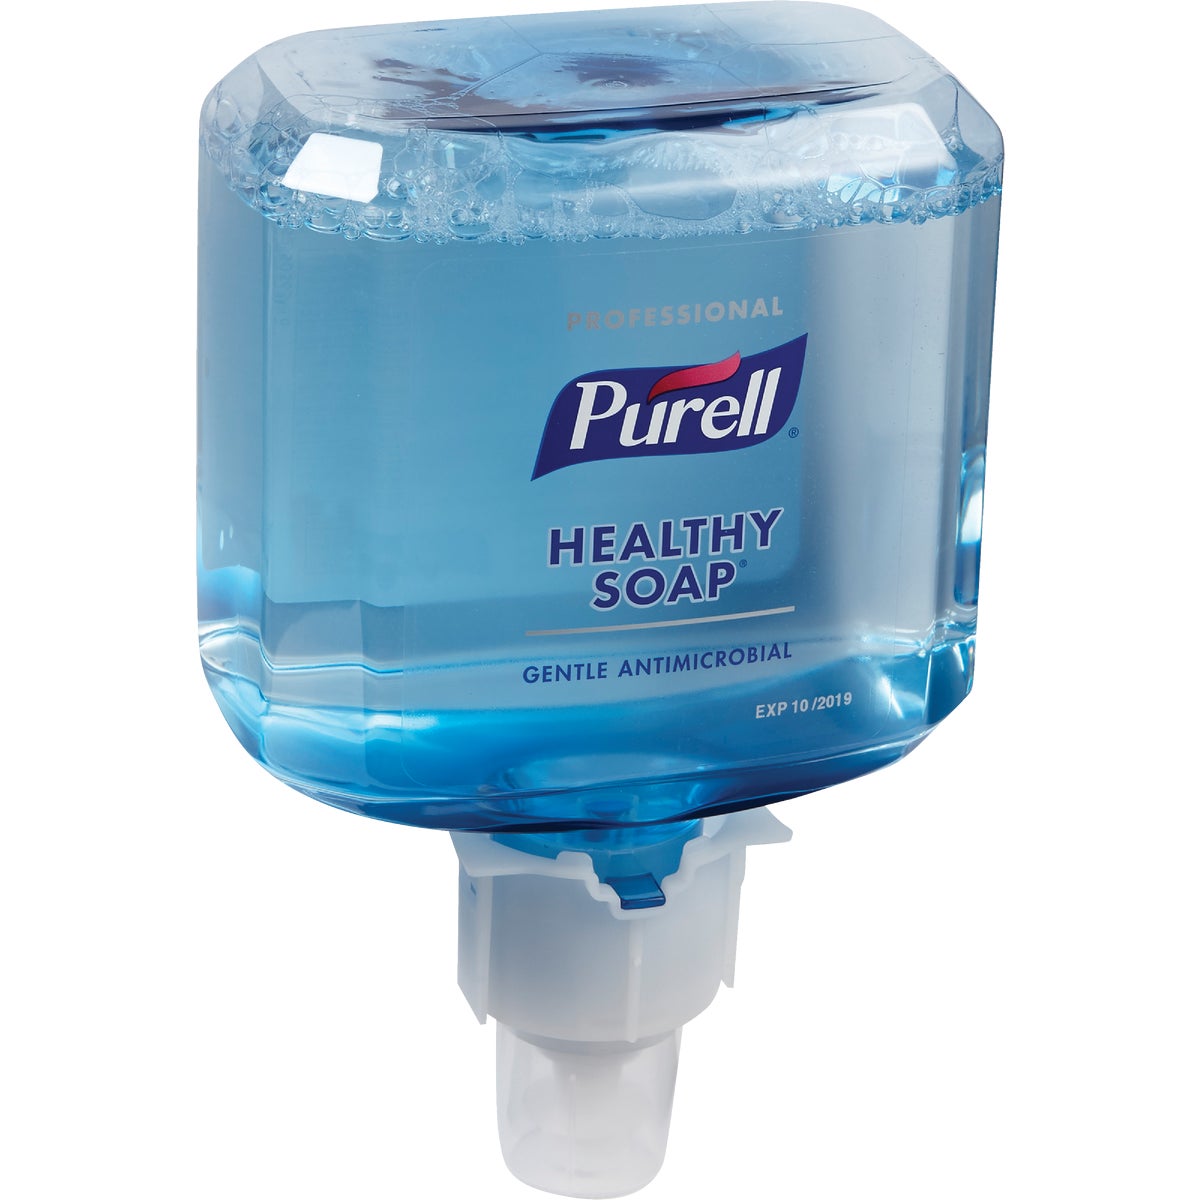 Item 602995, Make a positive impression with Purell Professional Healthy Soap 0.